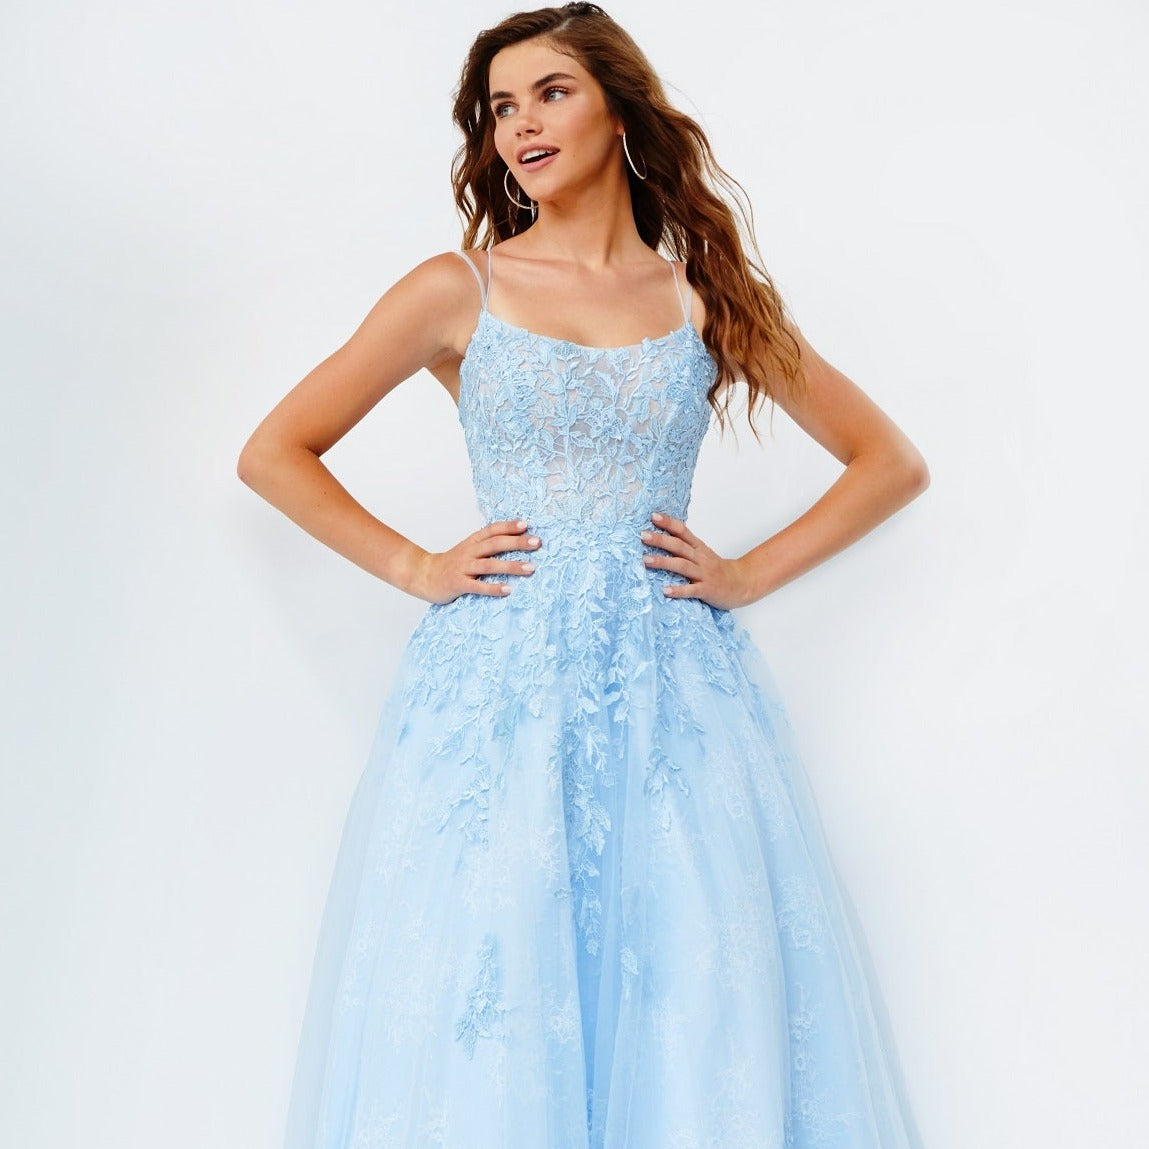 Jovani JVN06644 is a Long Lush Ballgown Prom Dress. This gown features a sheer fitted bodice with a scoop neckline and spaghetti straps. Floral lace appliques Embellish the top and cascade down into the full a line skirt. Open corset lace up tie back with a sweeping train